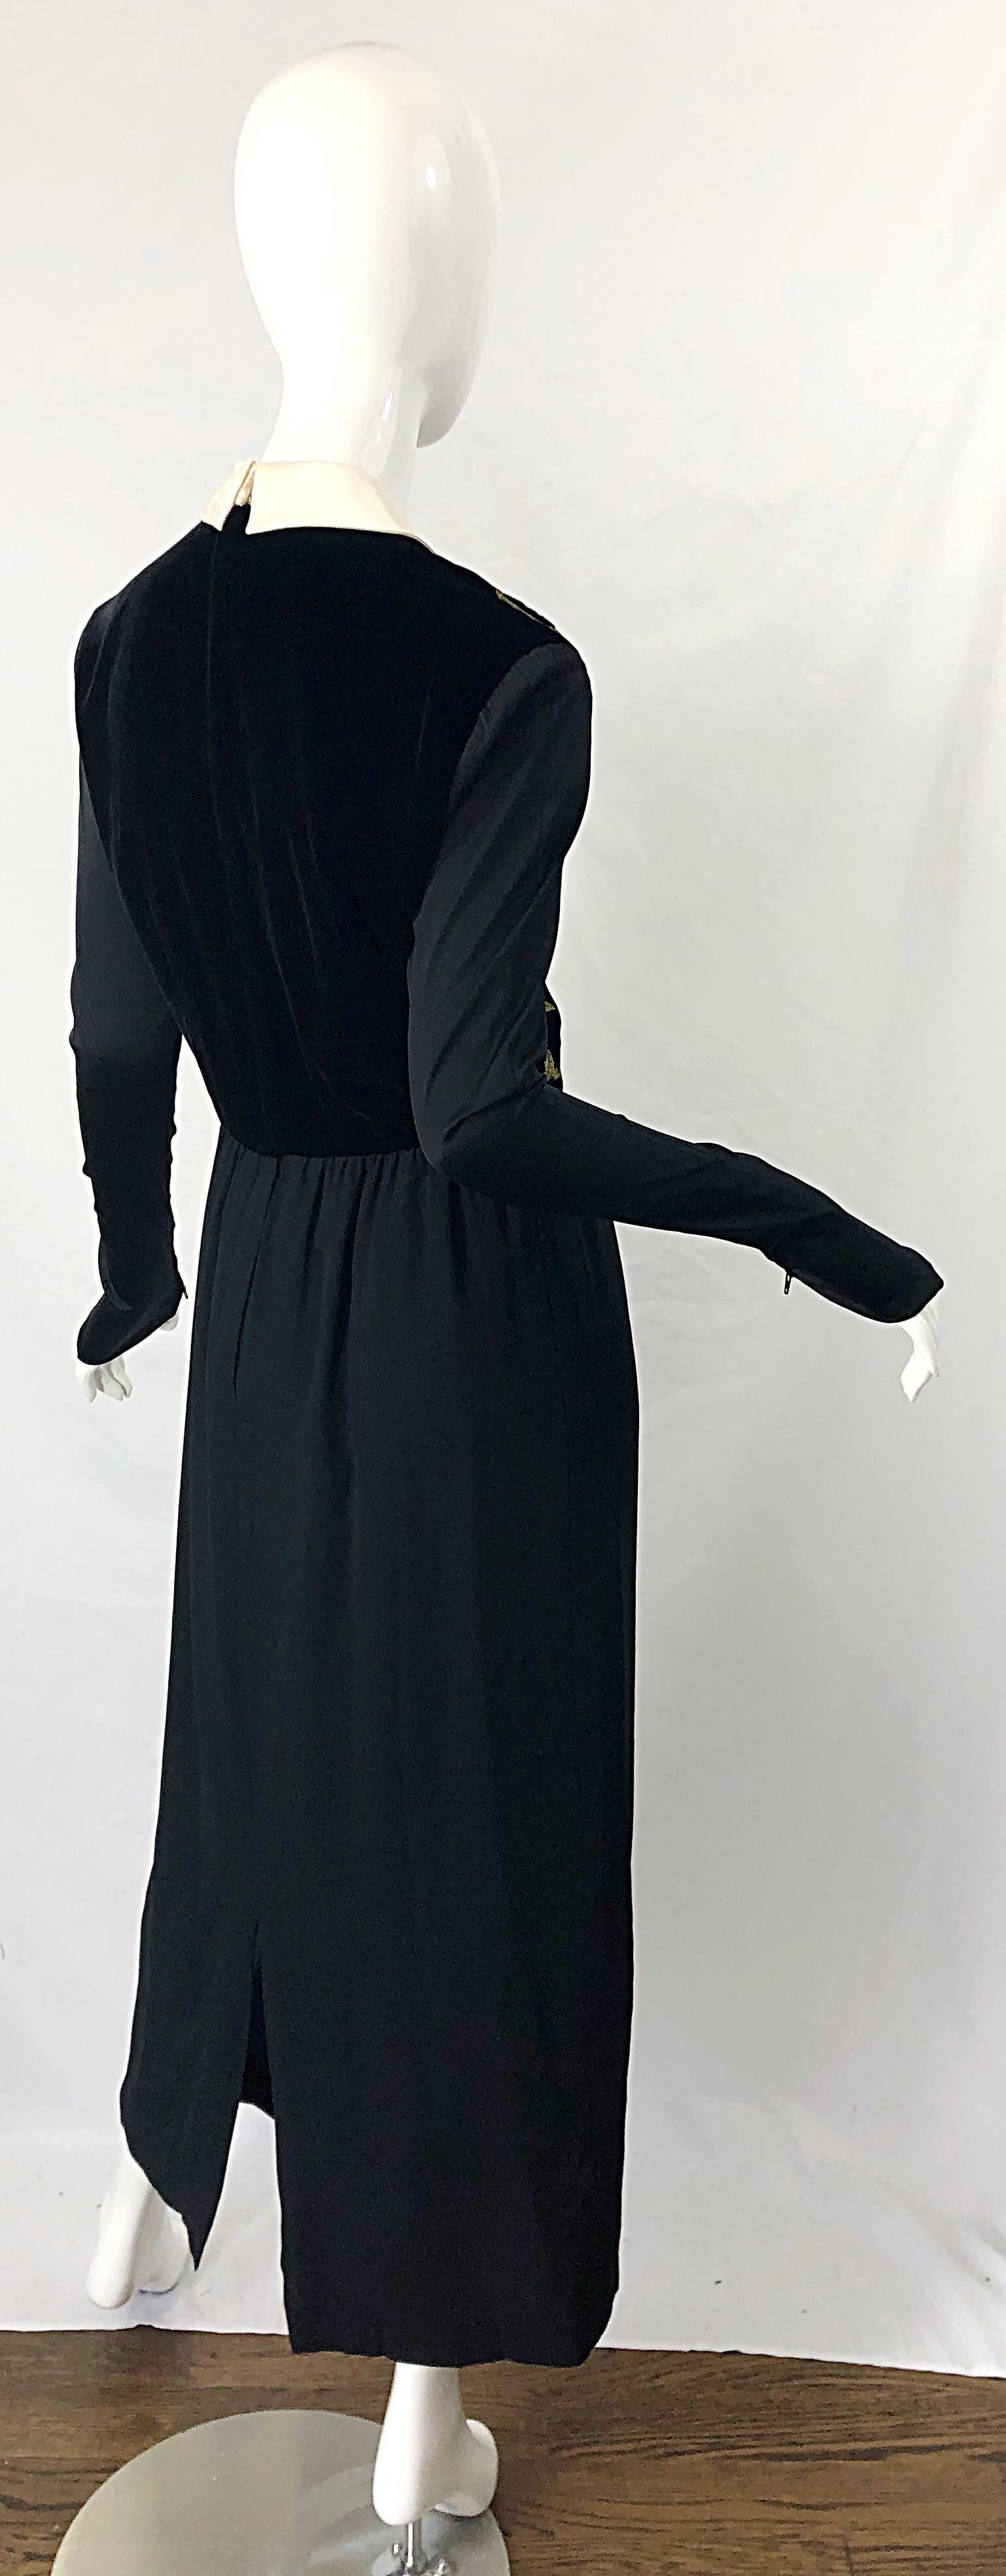 Karl Lagerfeld Runway Fall 1988 Black Gold Embroidered Vintage 80s Gown Dress For Sale 8